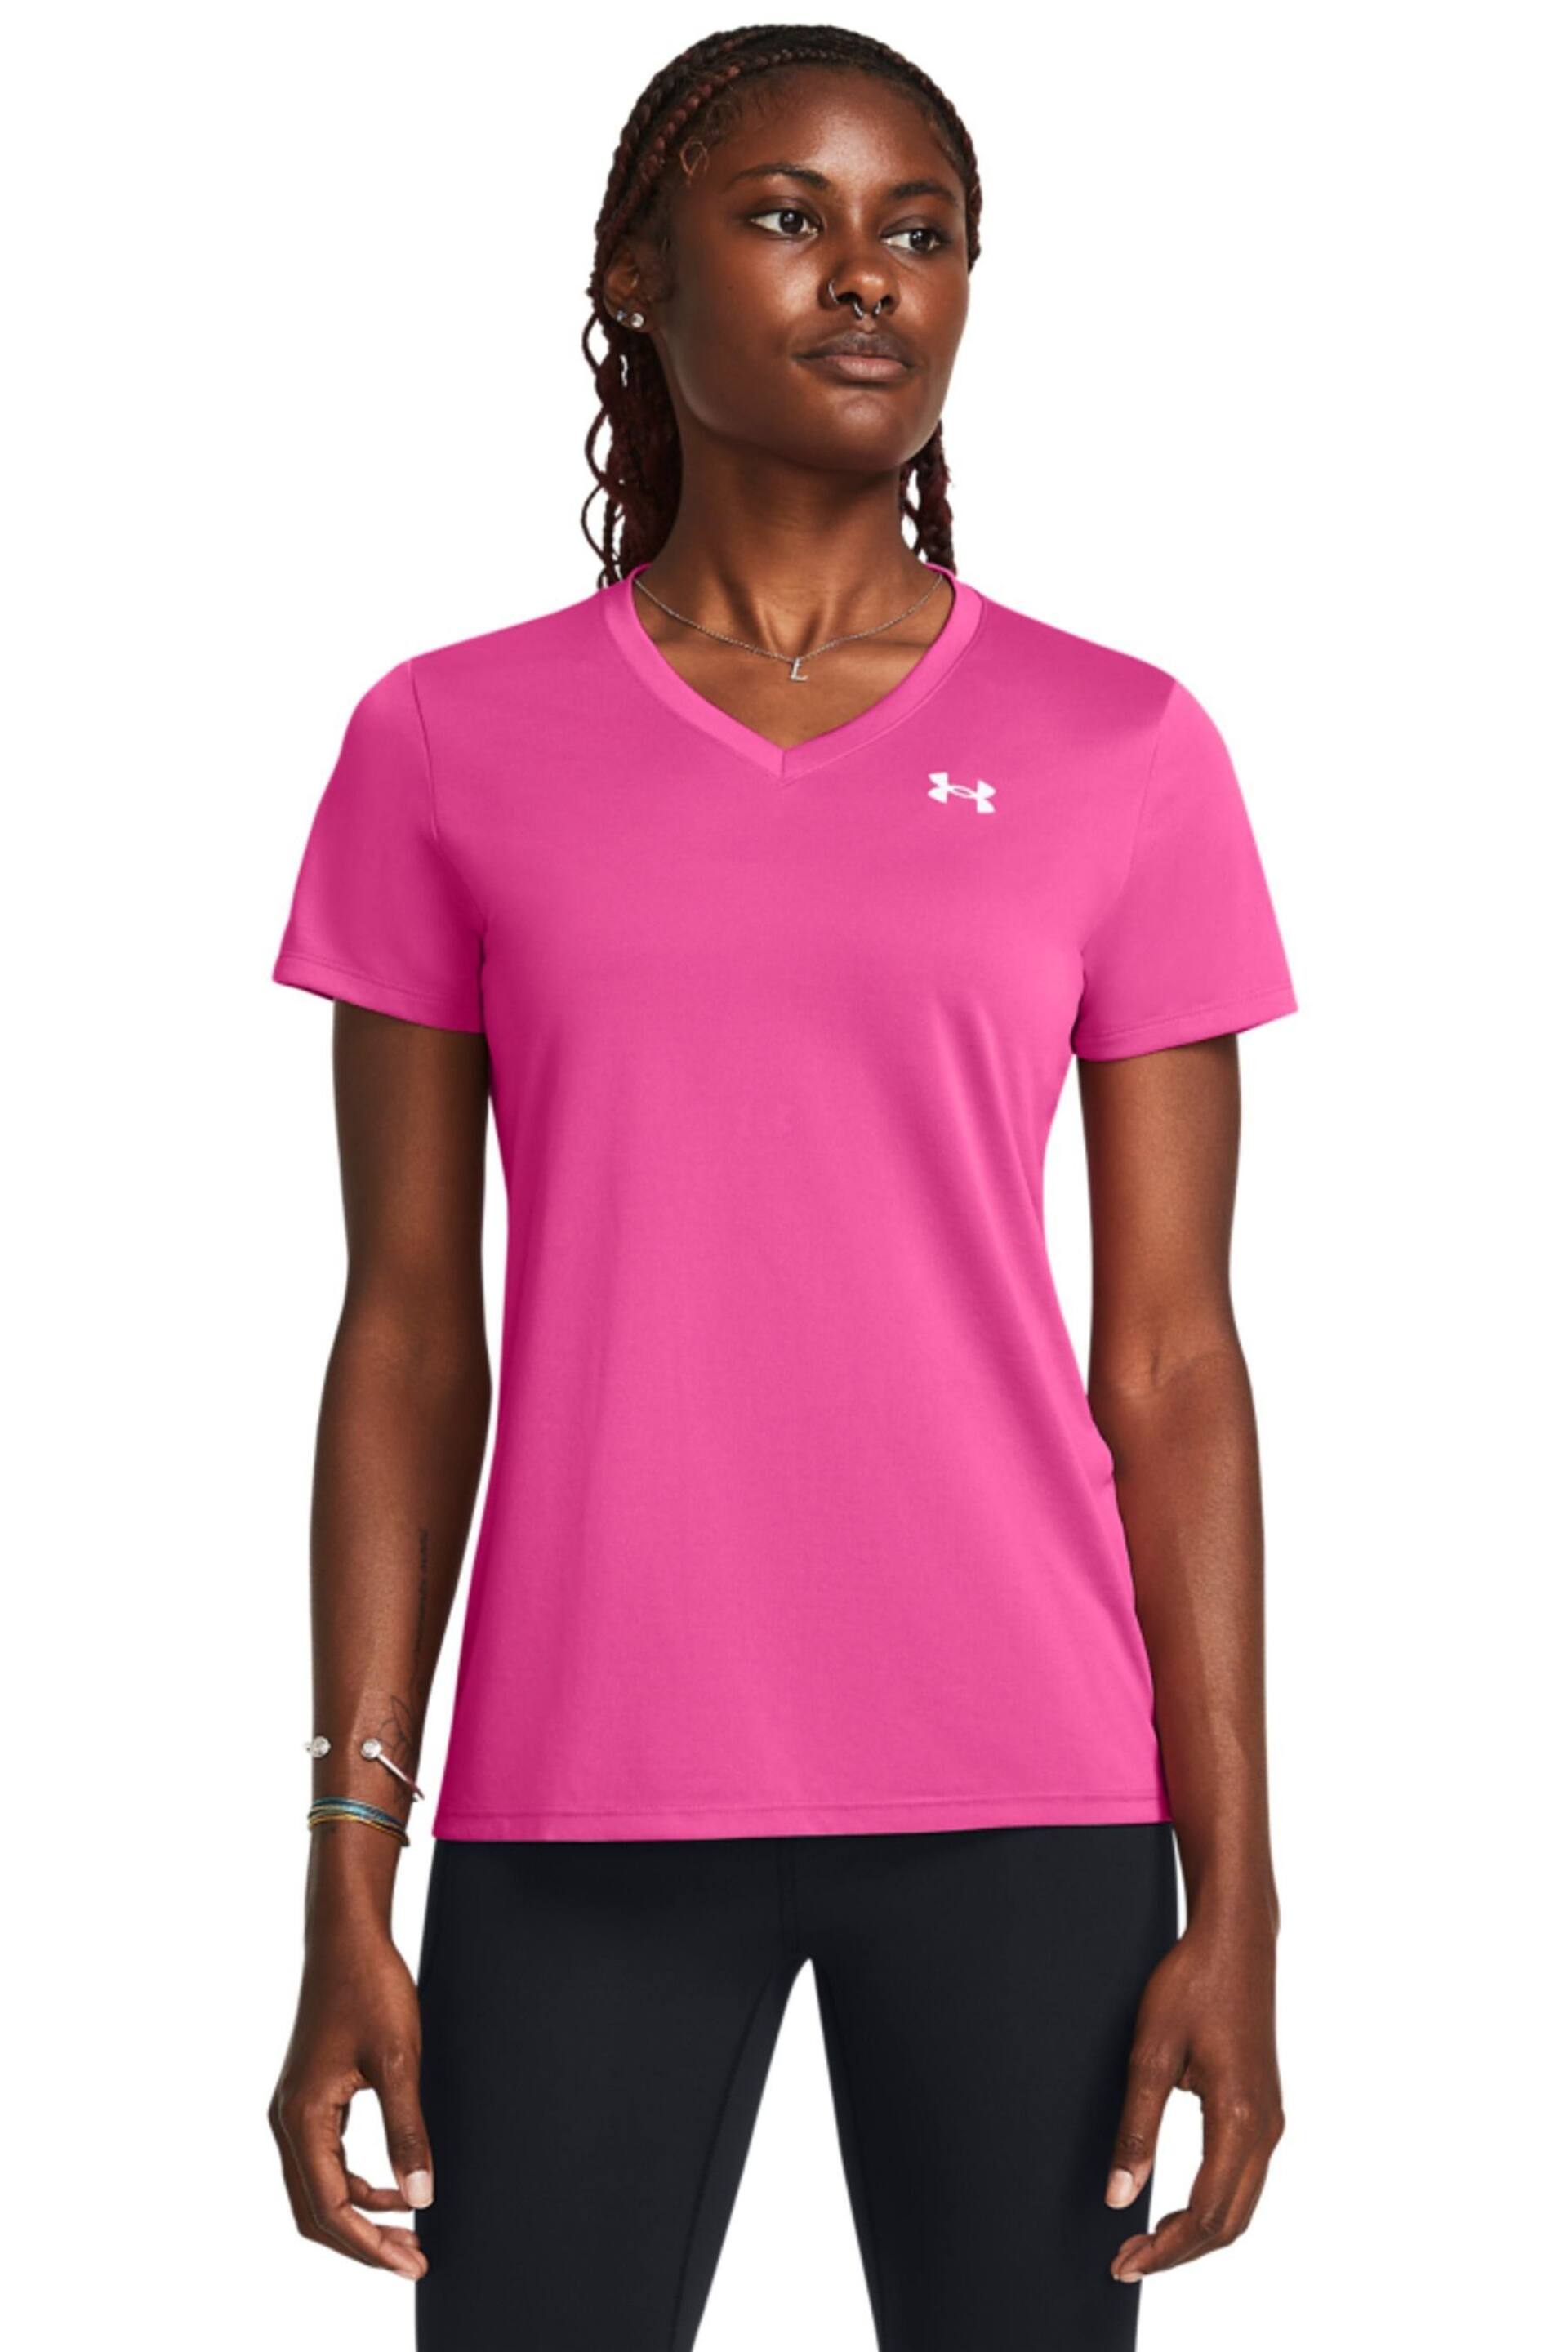 Under Armour Bright Pink V-Neck T-Shirt - Image 1 of 2